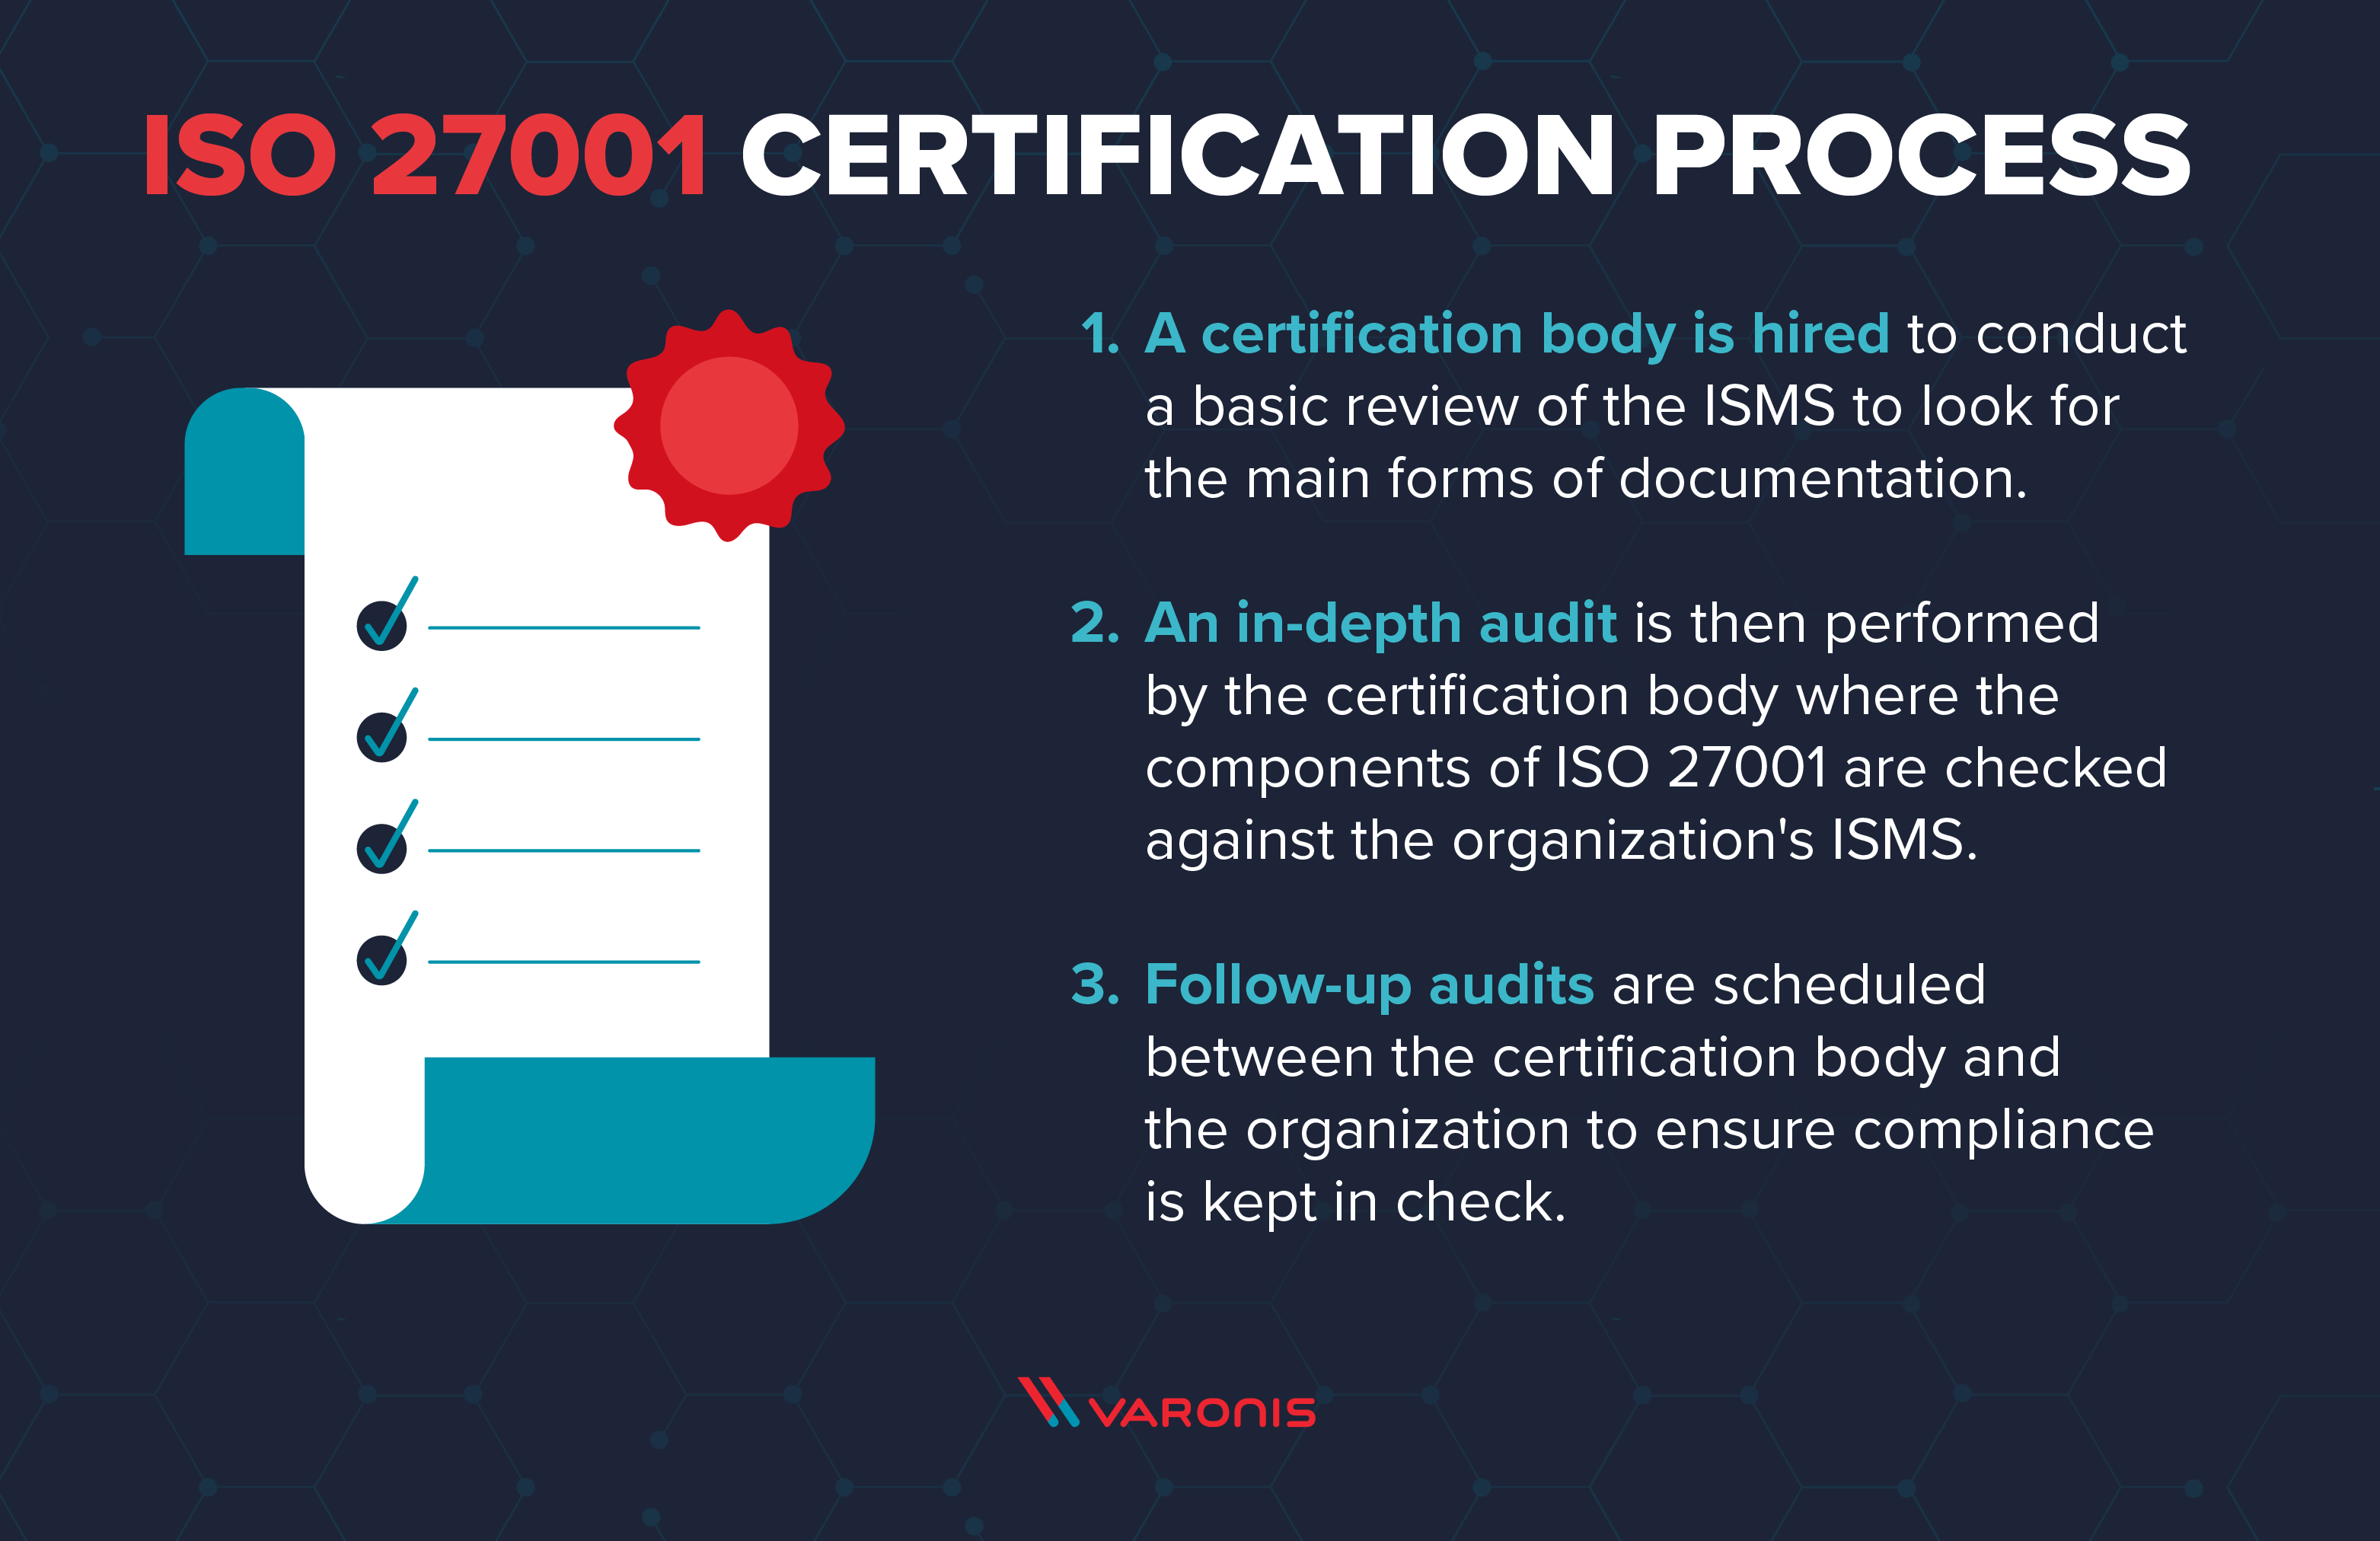 image of the ISO 27001 certification process